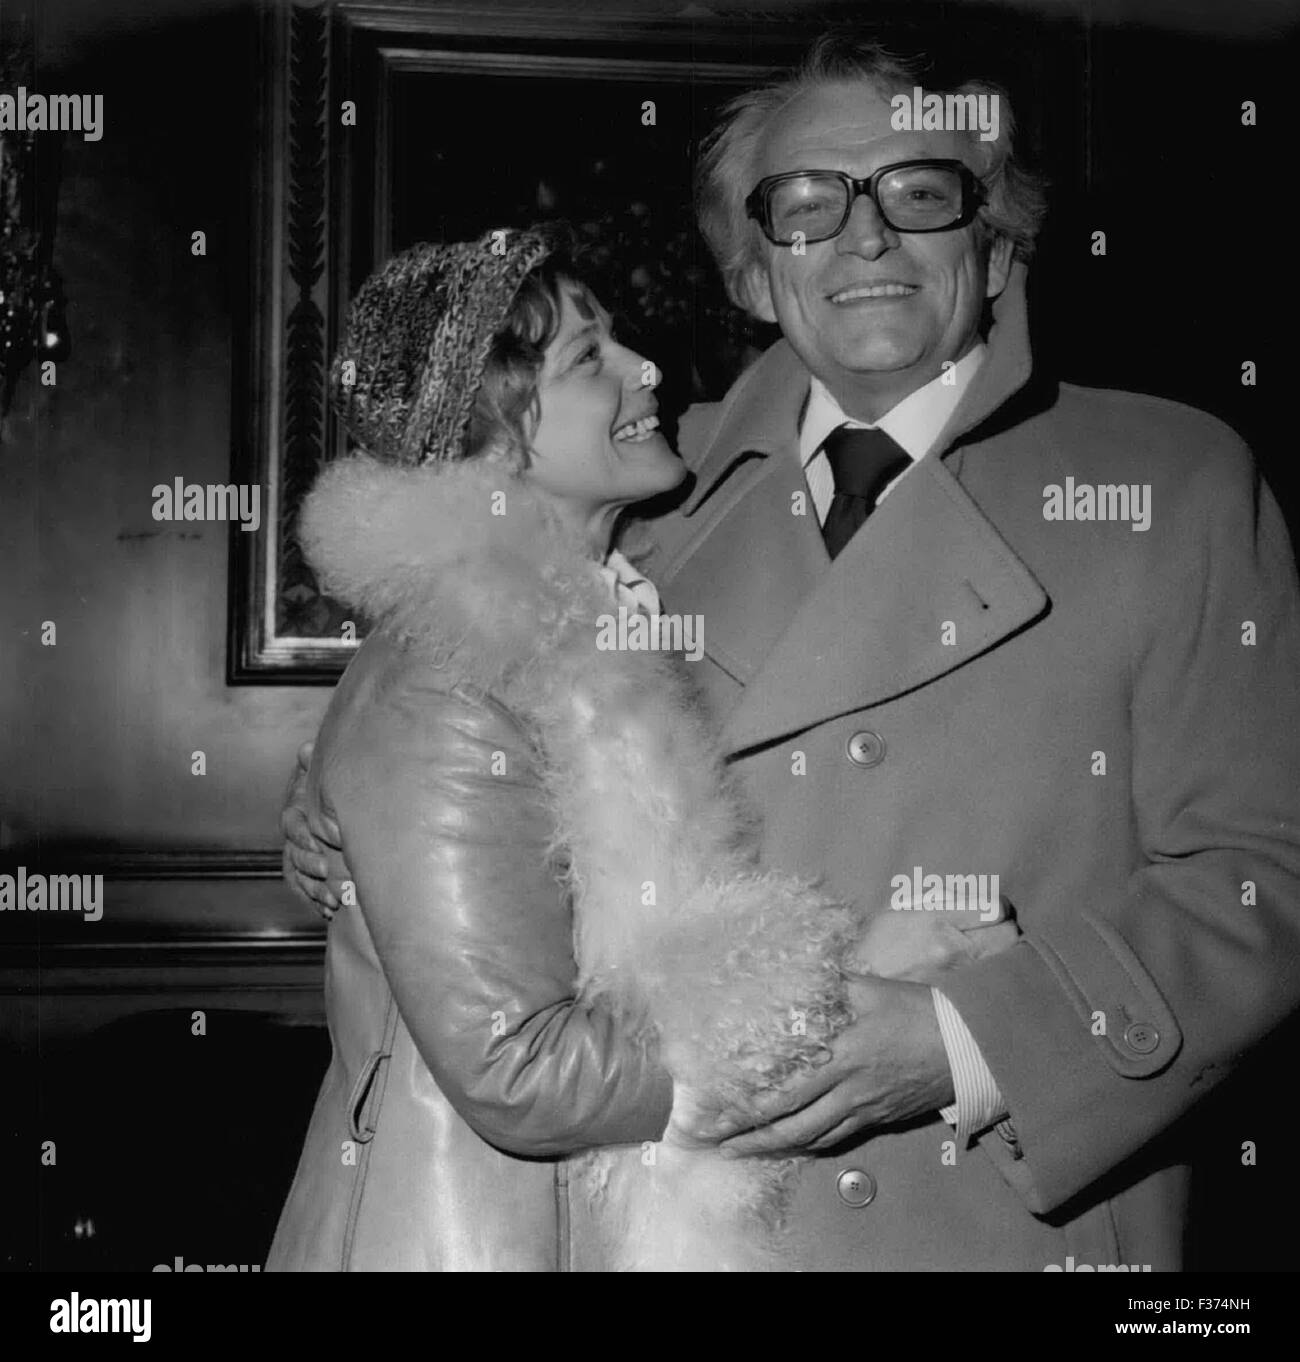 Dec. 29, 1974 - Maria Schell and Werner Baecker of Germany TV (after an interview), Essex House, Central Park South, New York. © Keystone Pictures USA/ZUMAPRESS.com/Alamy Live News Stock Photo